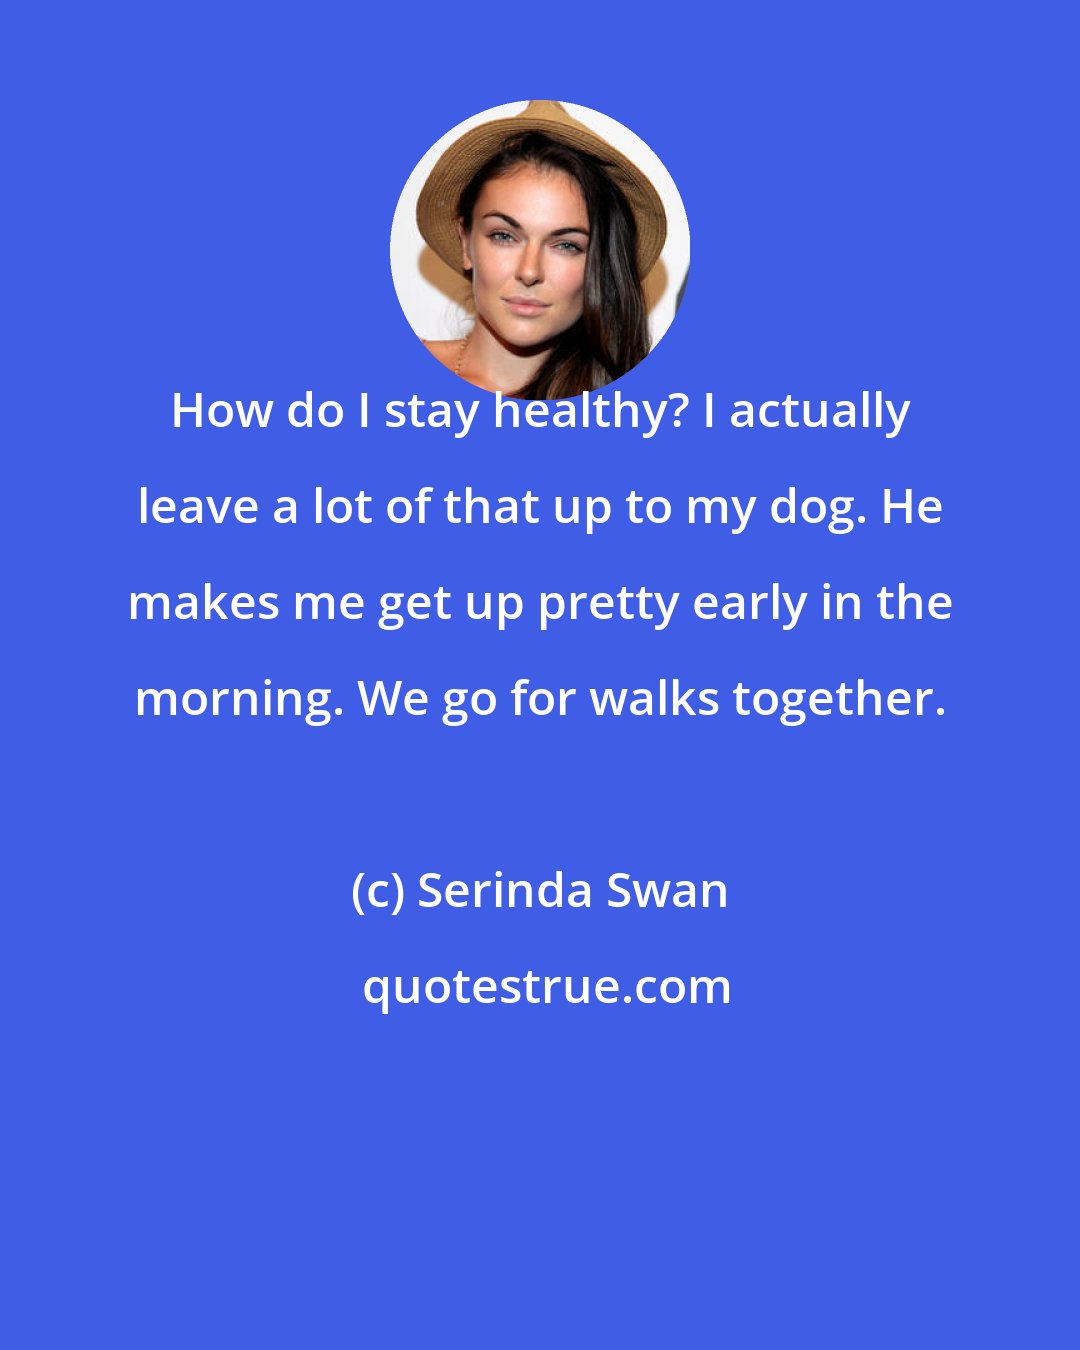 Serinda Swan: How do I stay healthy? I actually leave a lot of that up to my dog. He makes me get up pretty early in the morning. We go for walks together.